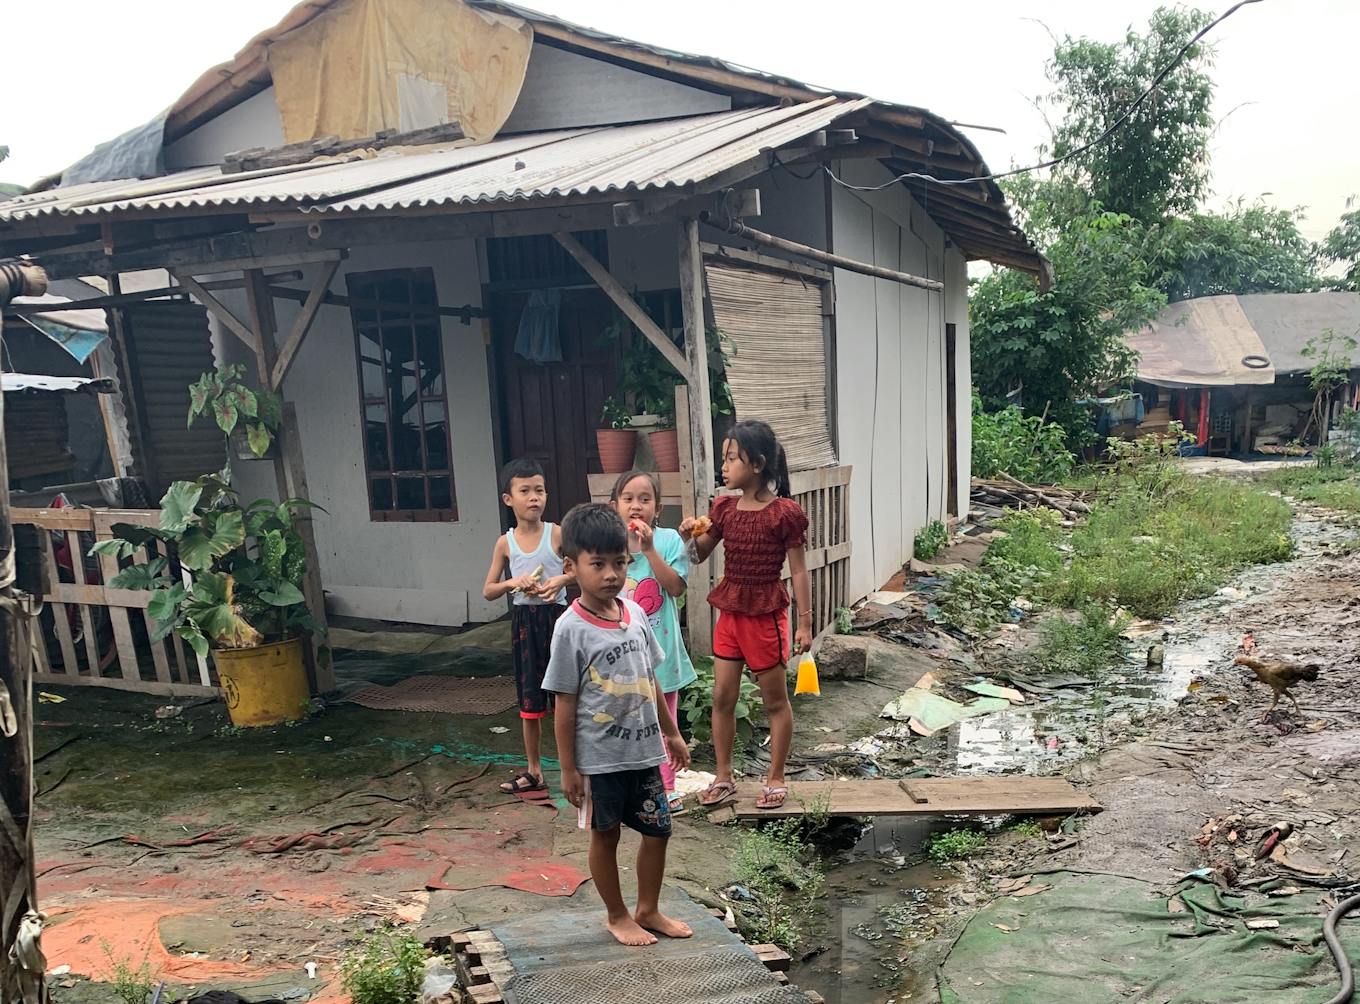 Children chat outside their home in landfill village in West Java, Indonesia.